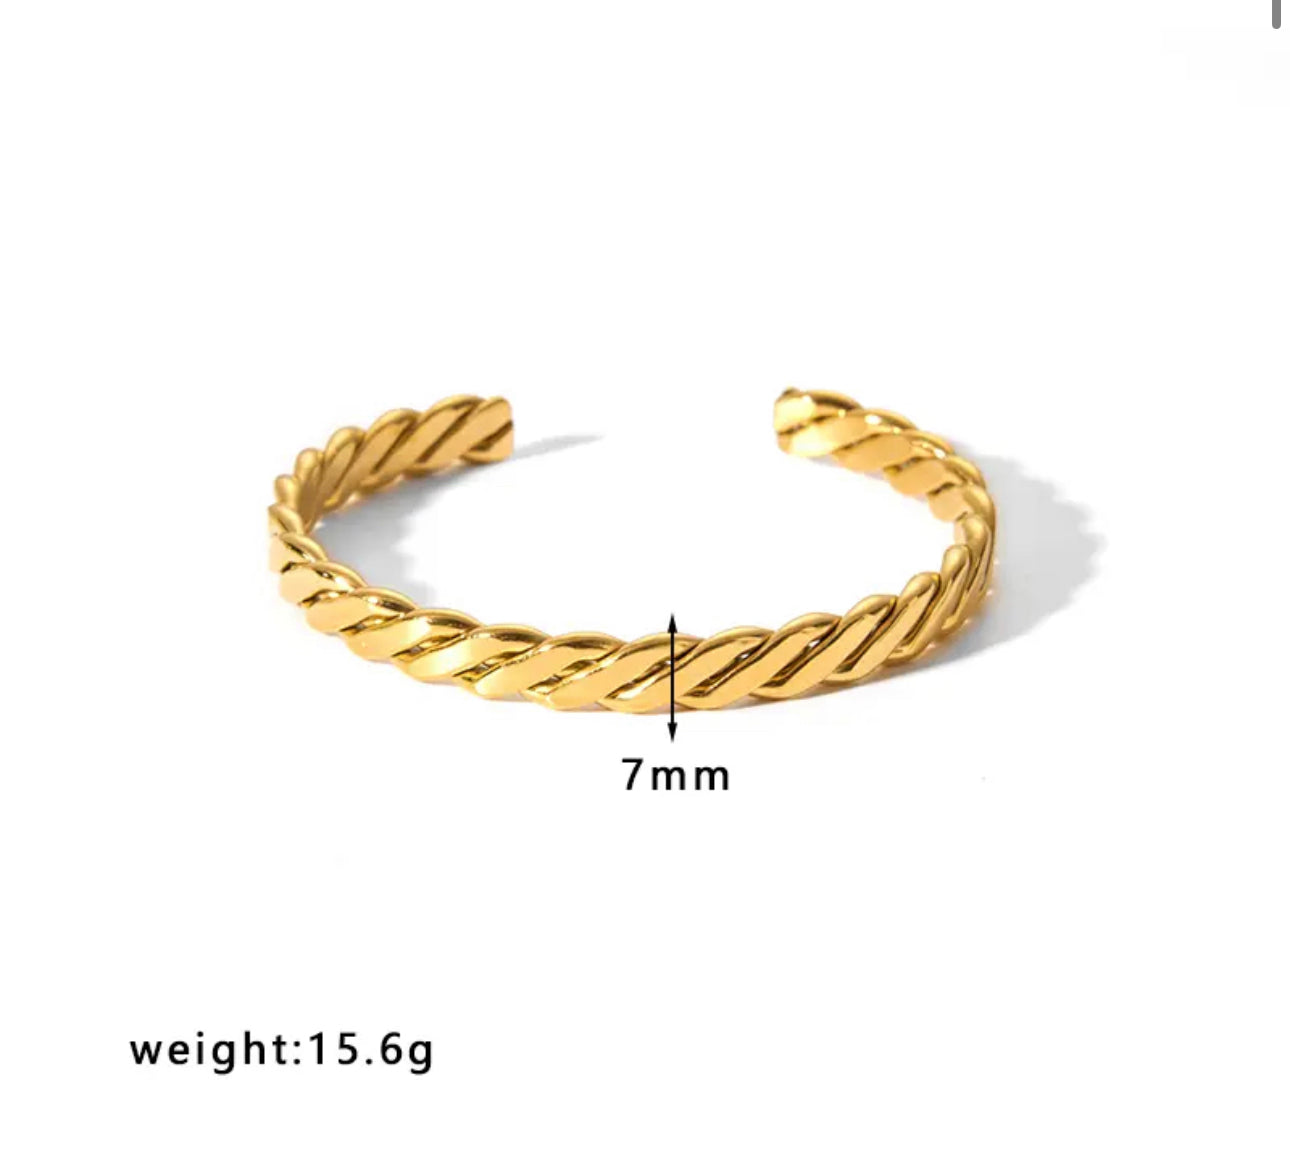 Gold Twisted Rope Cuff